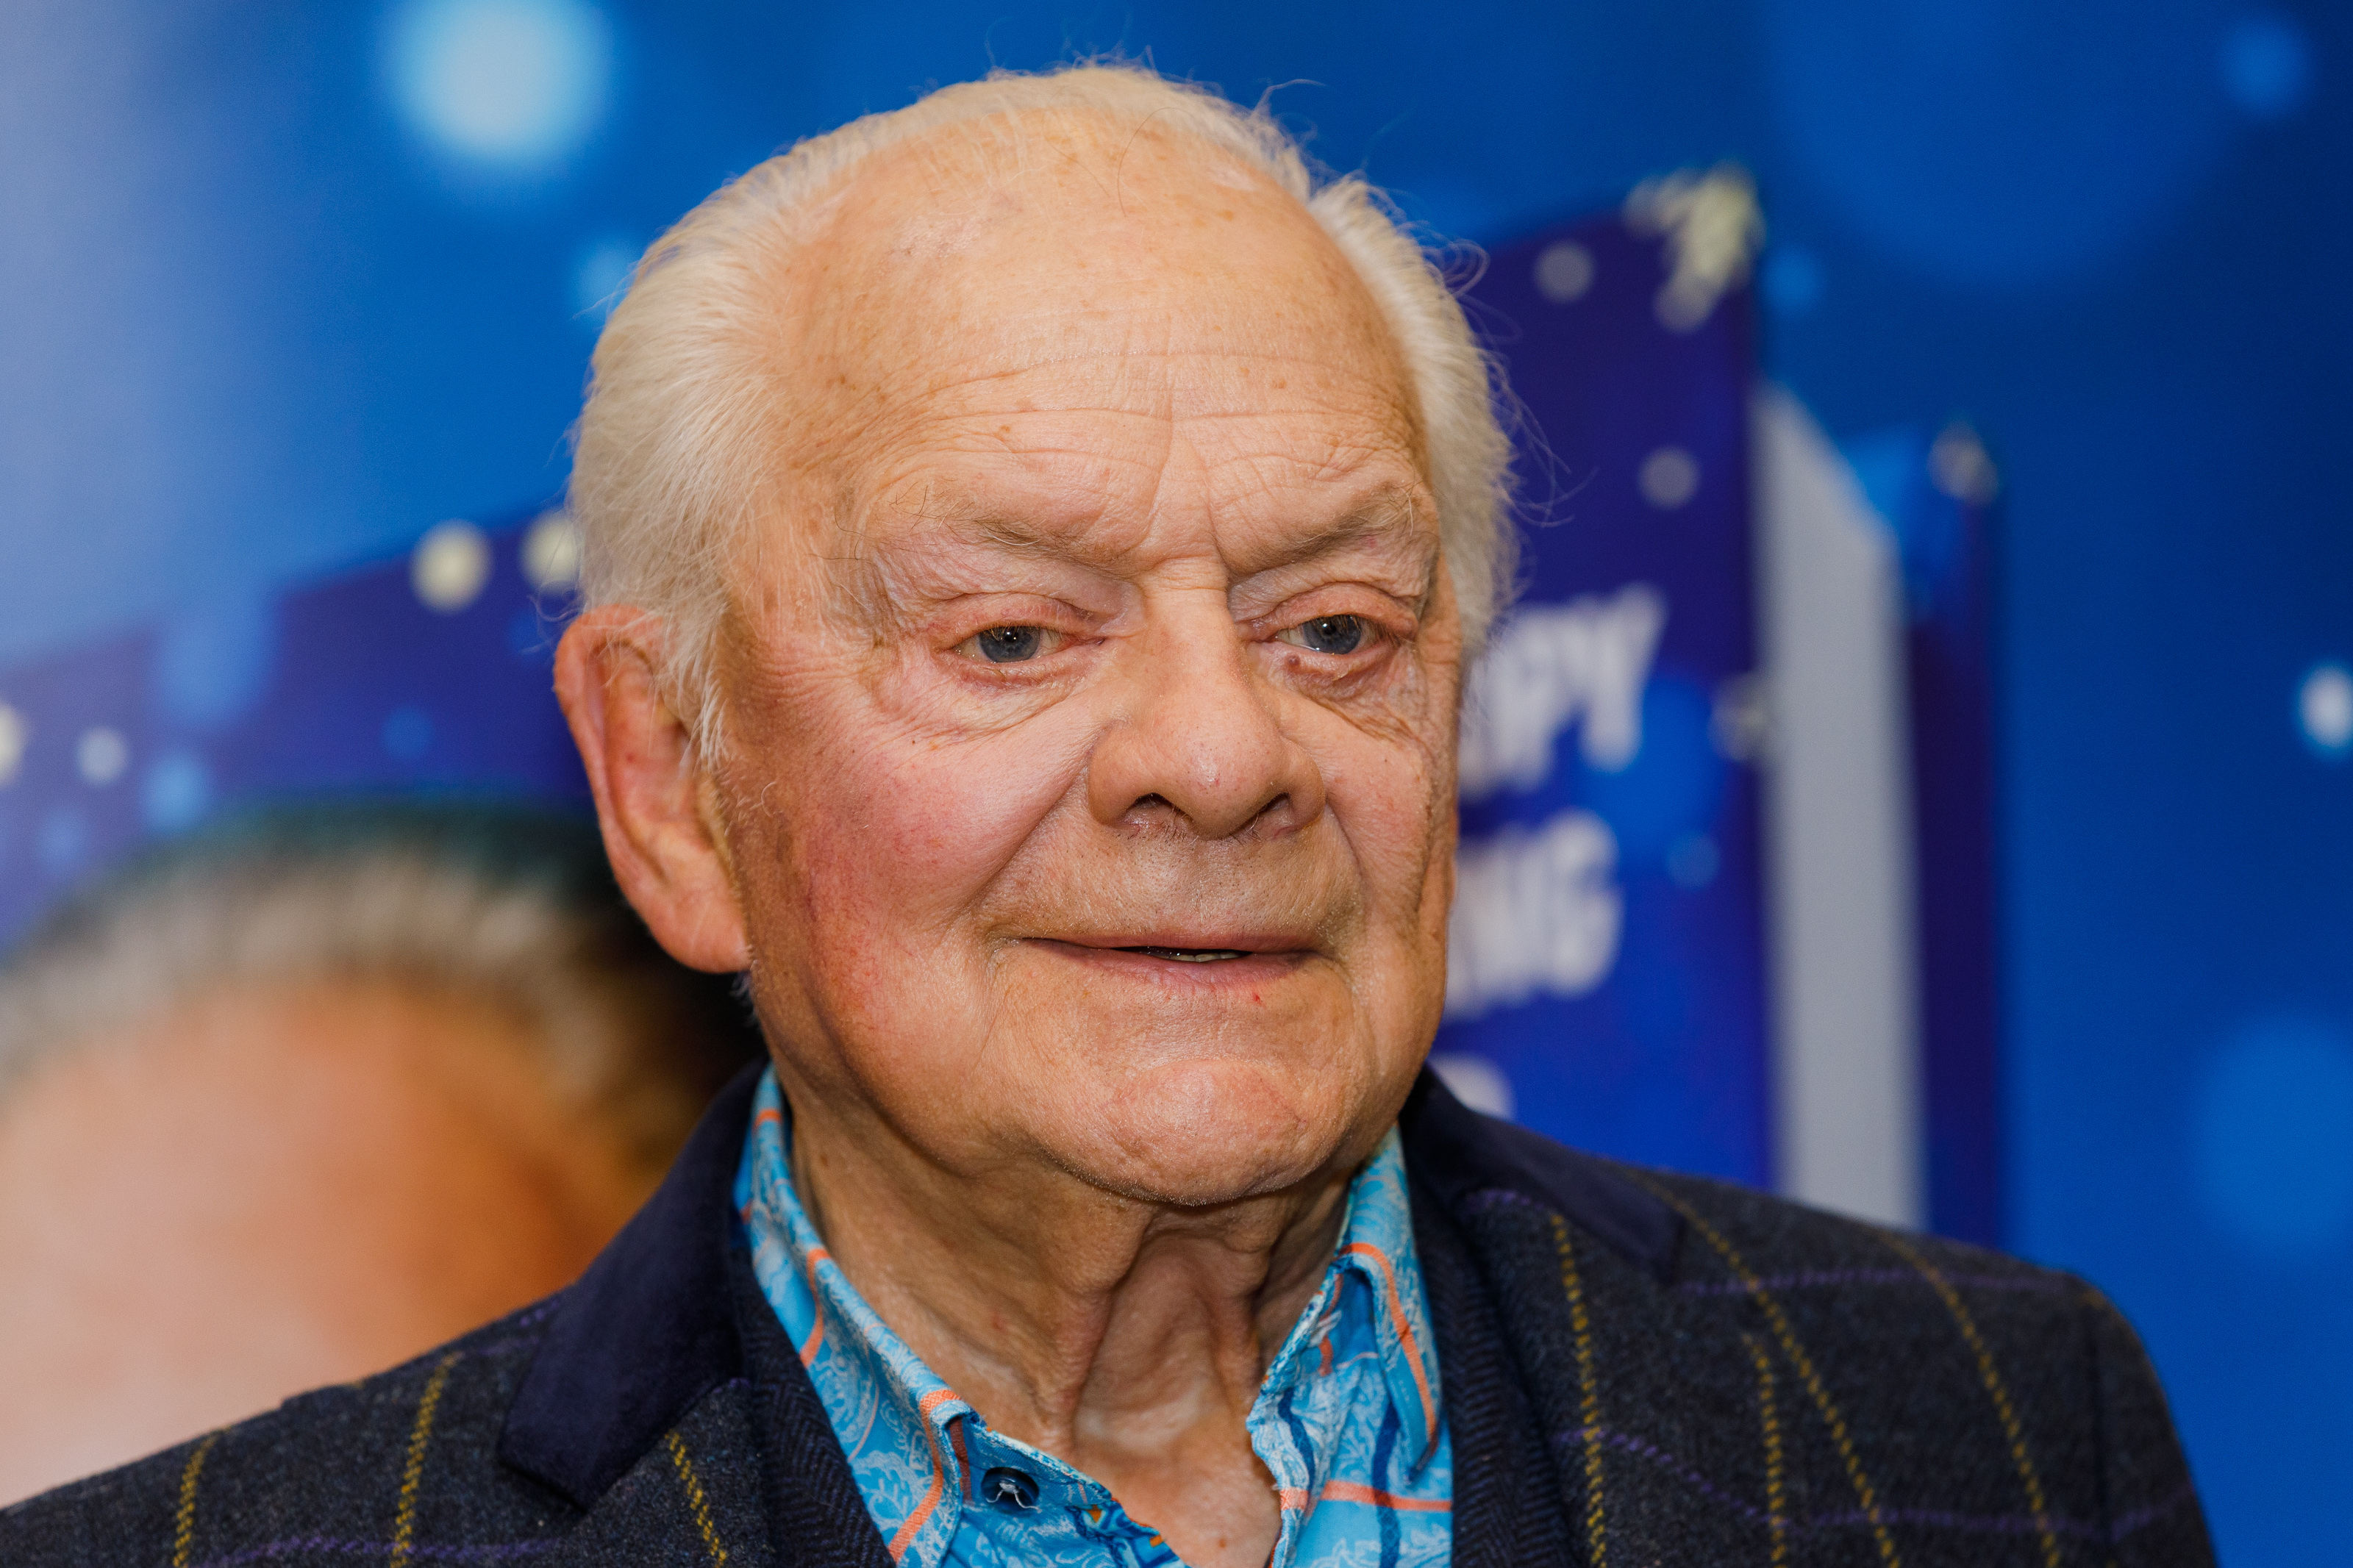 Sir David Jason at Waterstones Piccadilly on October 13, 2022, in London, England. | Source: Getty Images